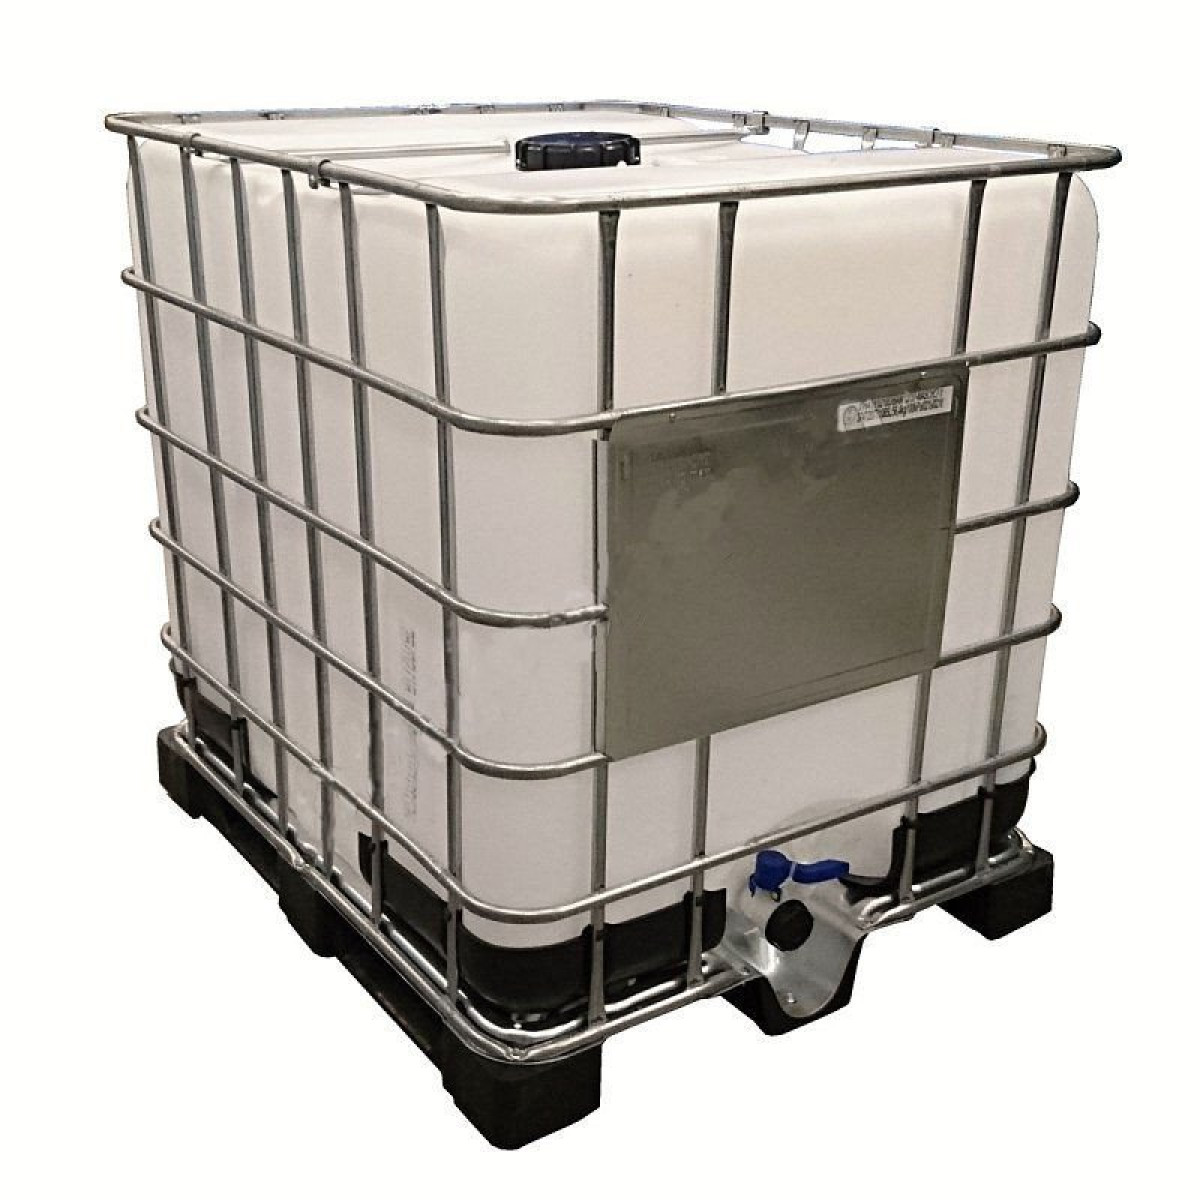 SCHÜTZ 1000 L IBC CONTAINER, REASONED / ENDED, ANTISTATIC EX WITH UN,  RINED, METAL PALLET, 150/50